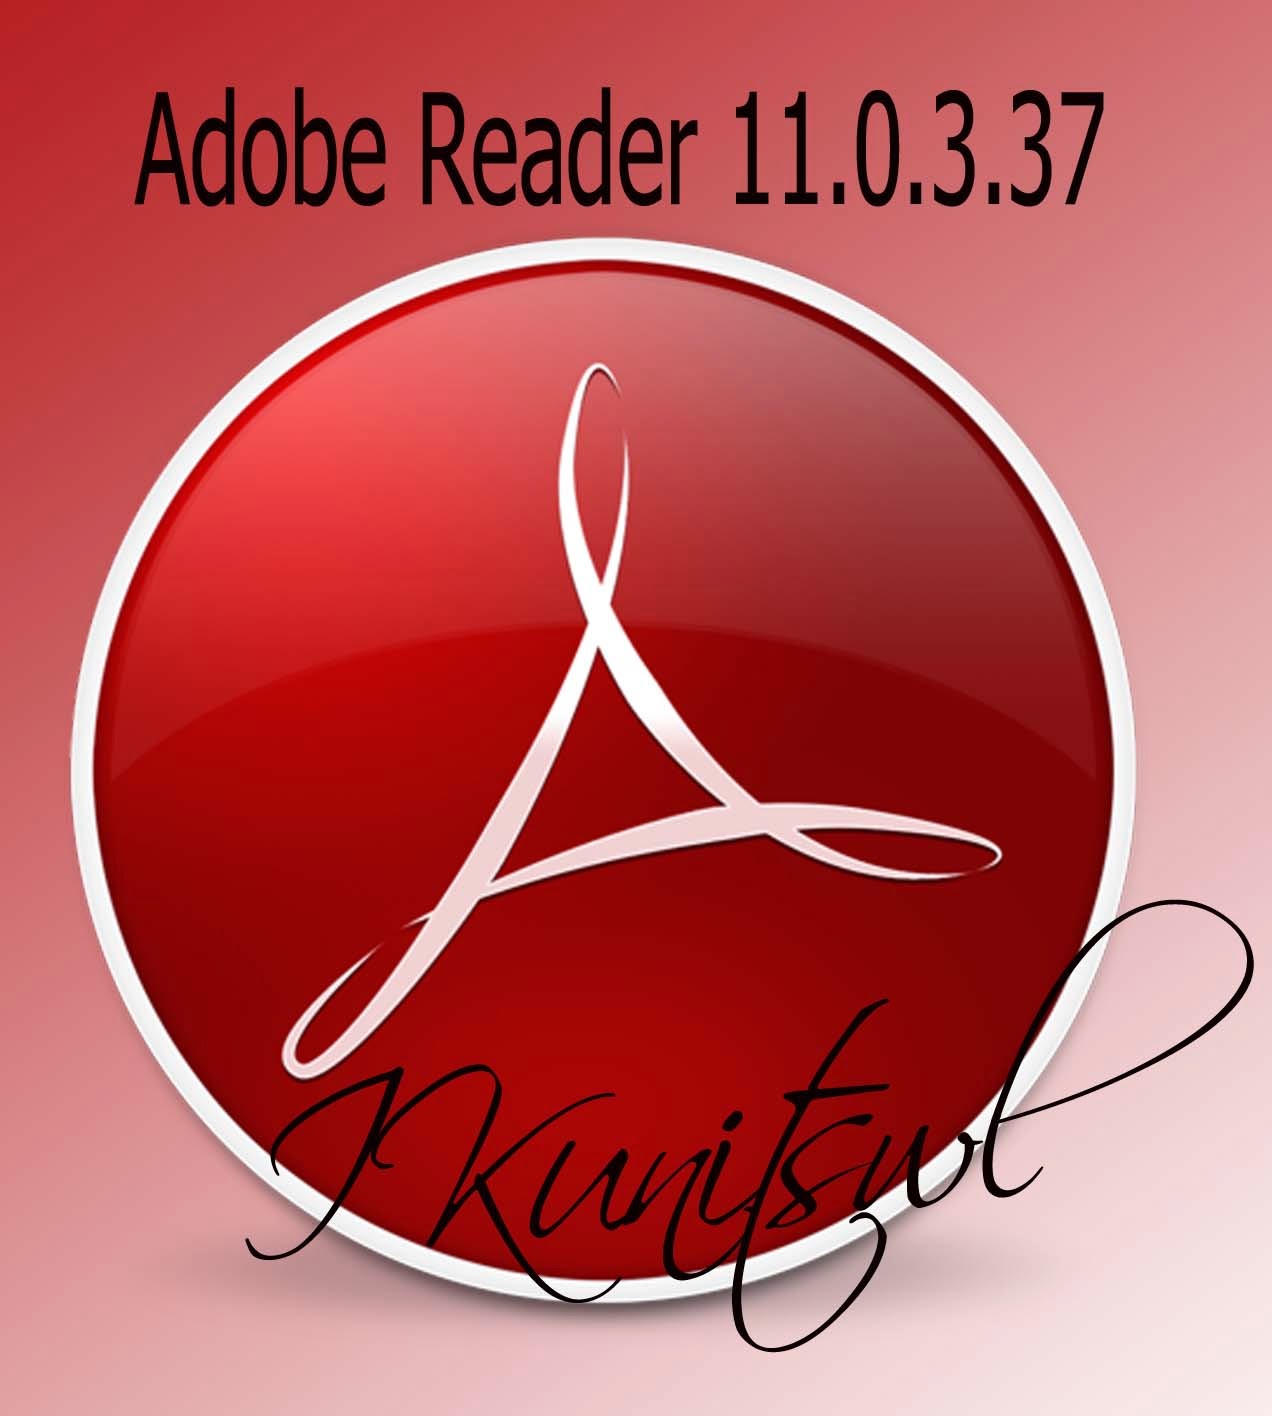 adobe reader and writer free download for windows 7